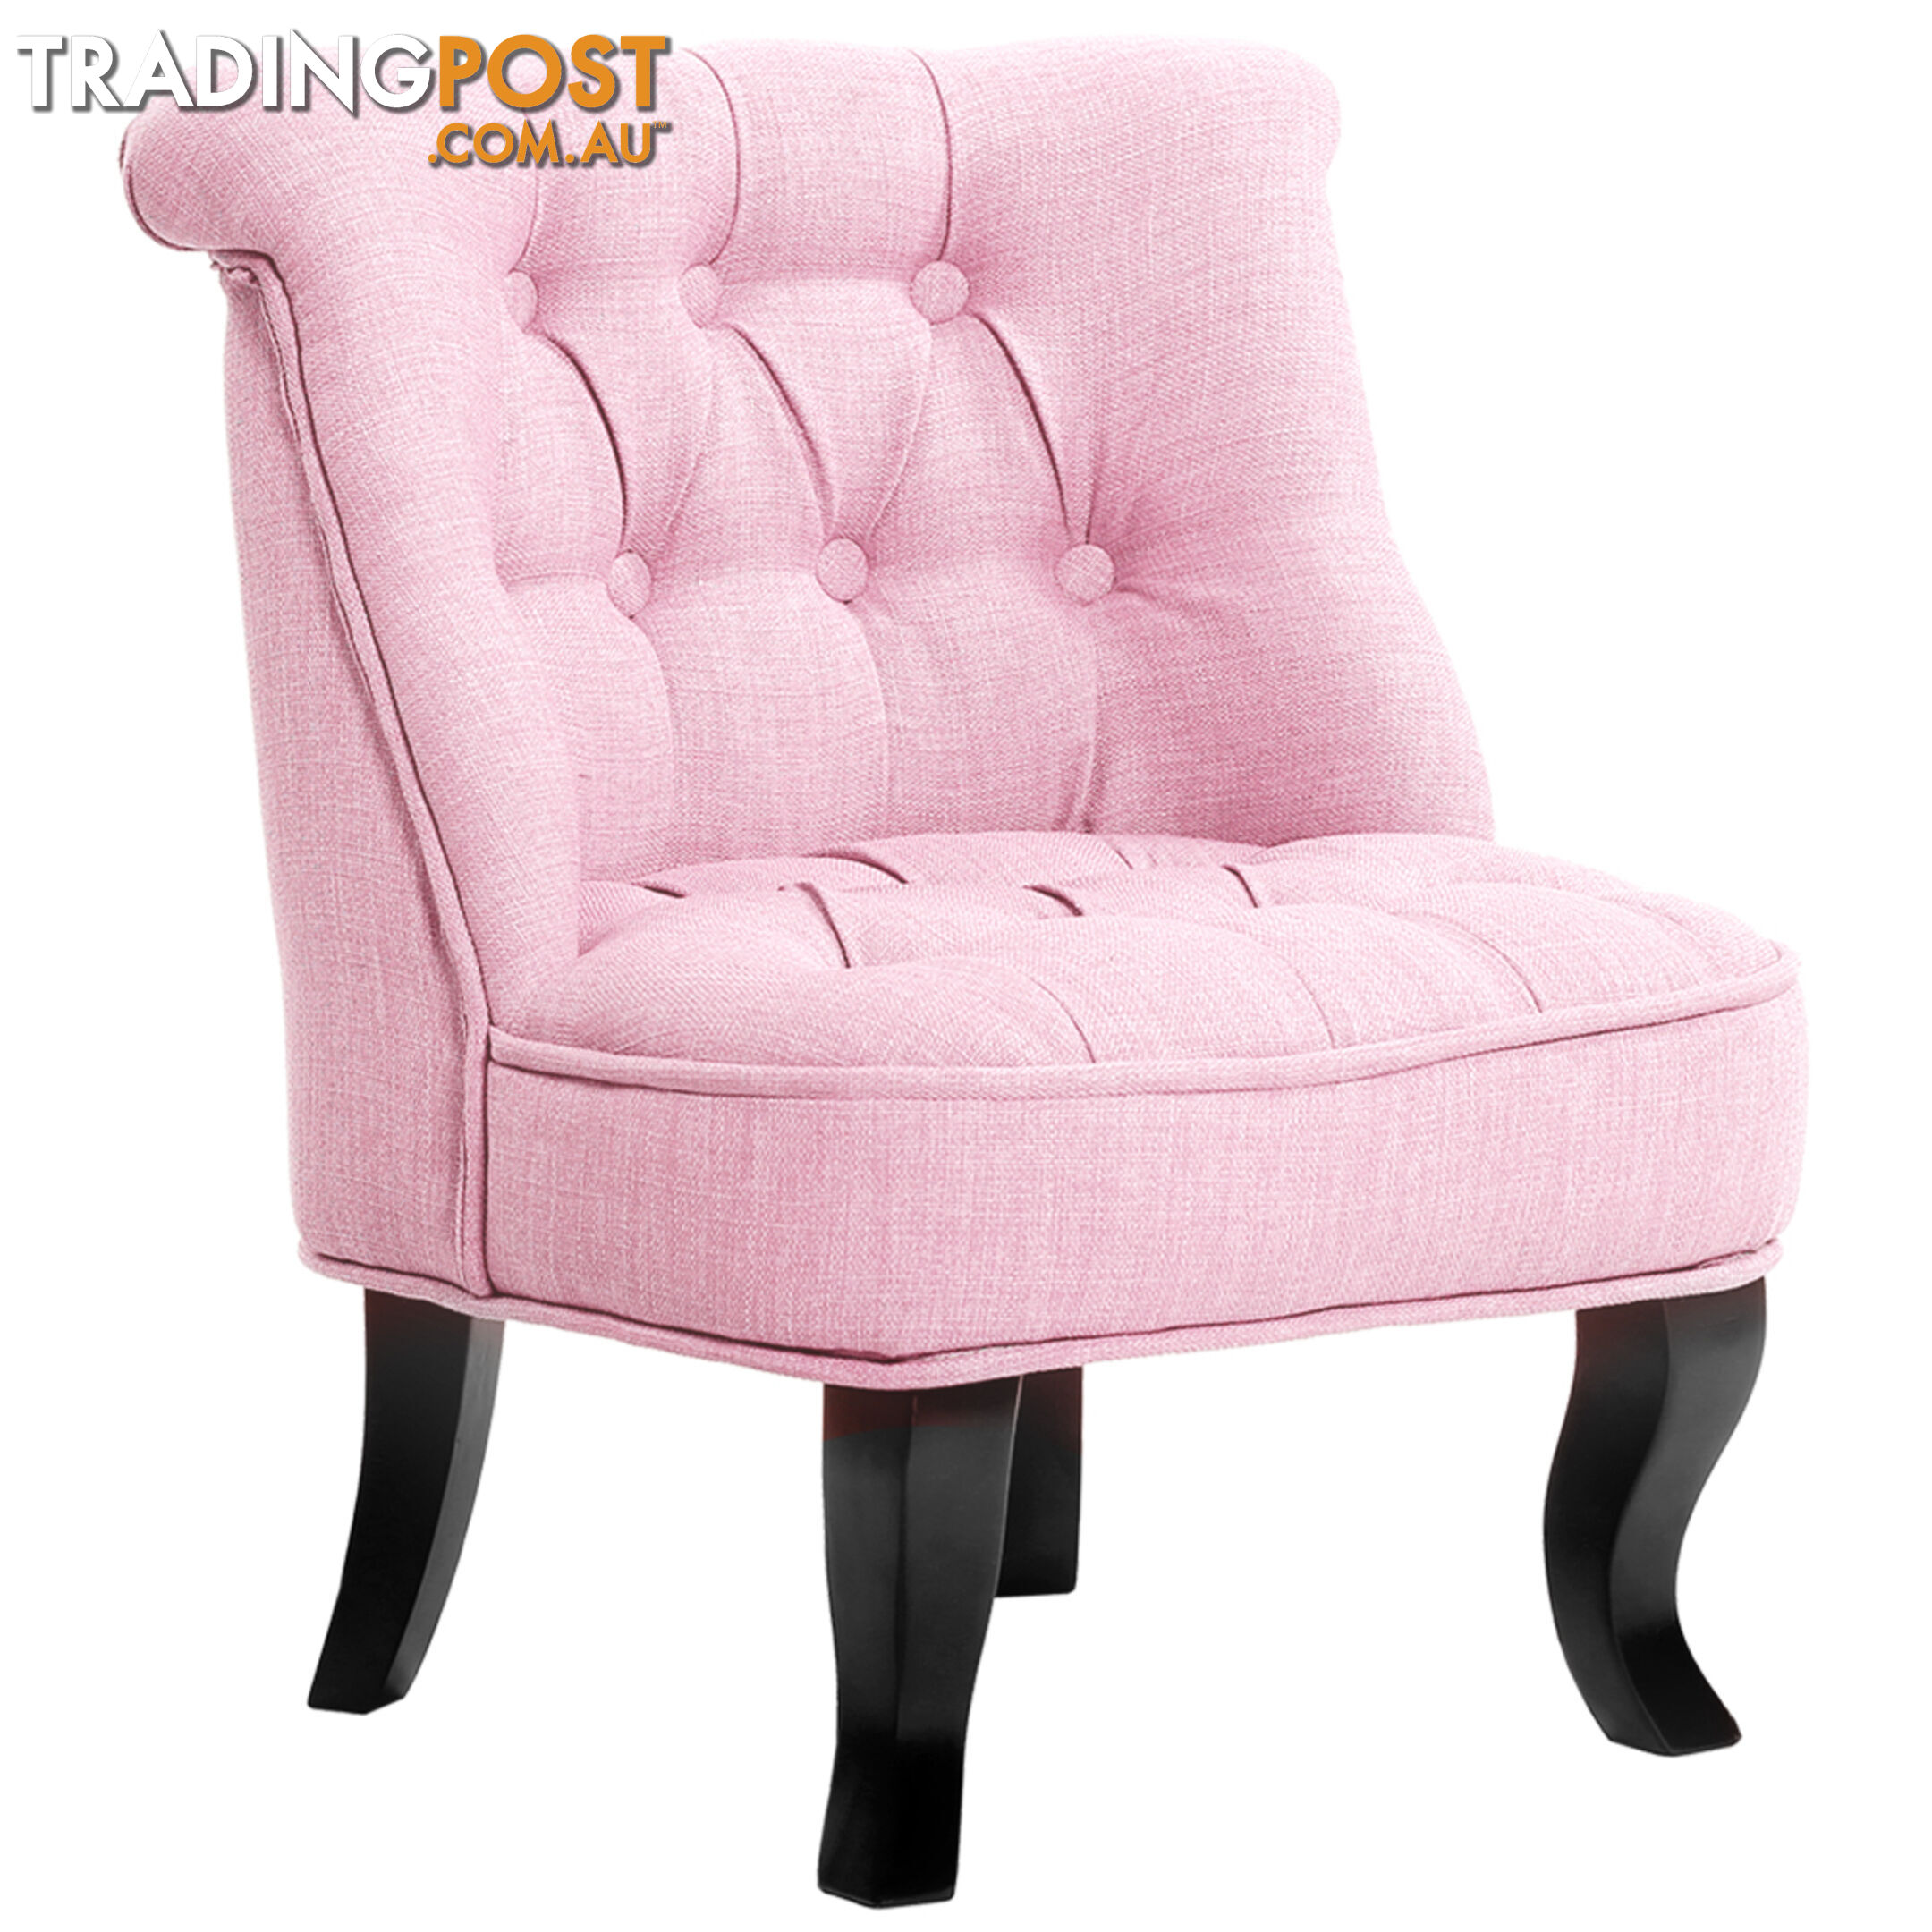 Lorraine Chair French Provincial Kid Fabric Sofa Pastel Pink